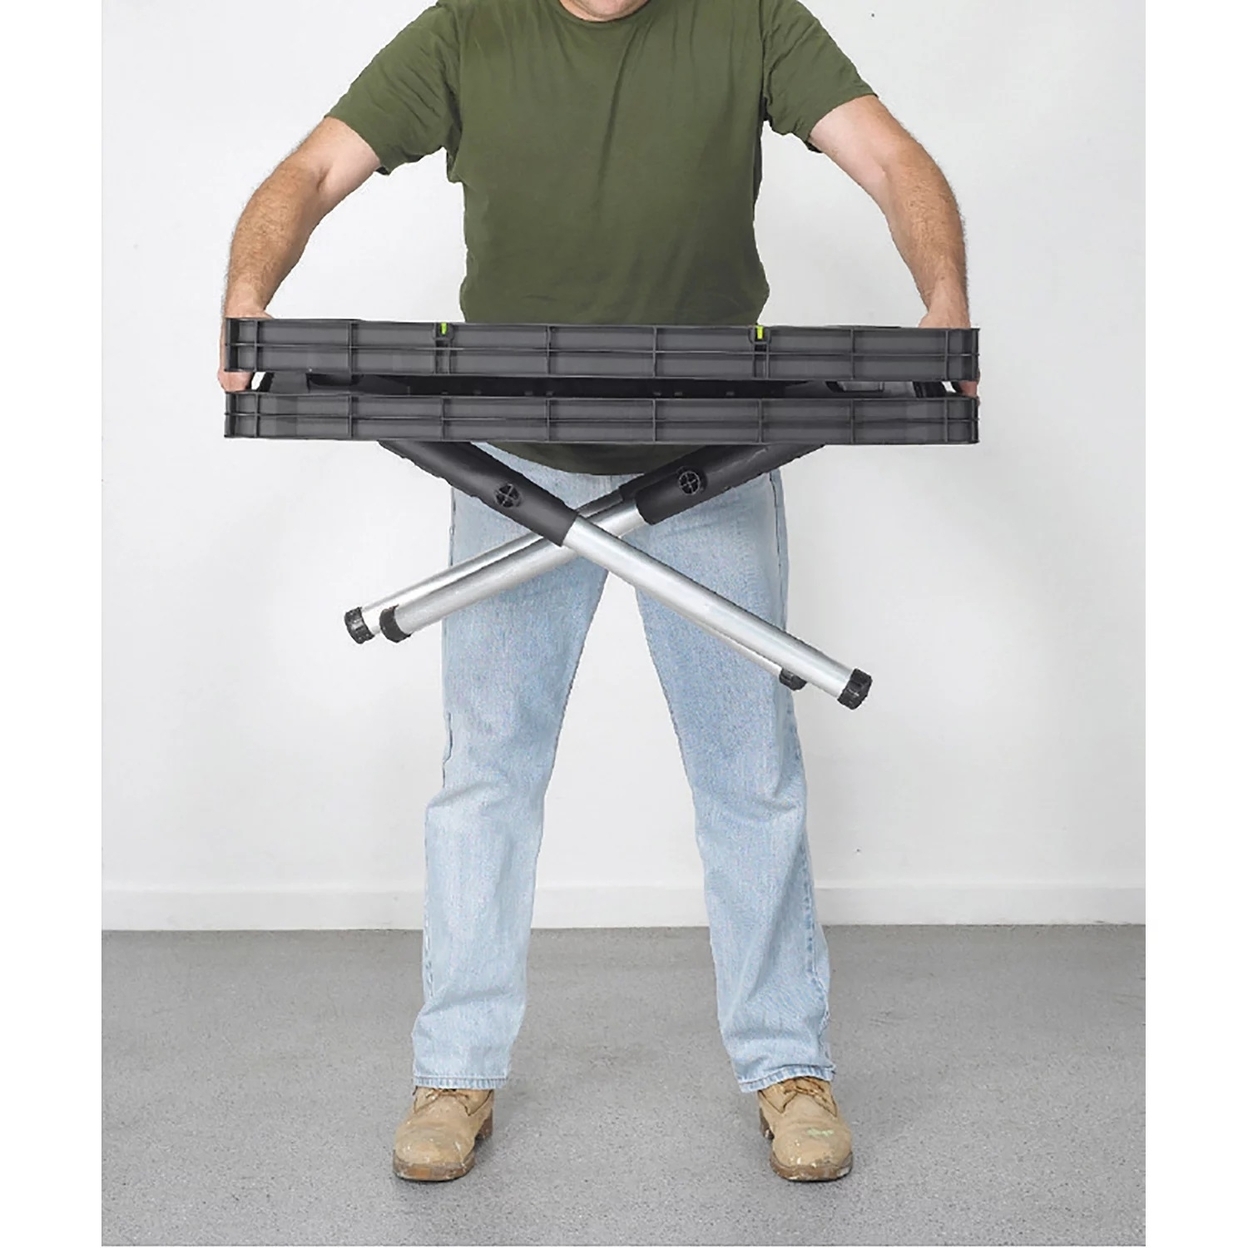 Keter Folding Work Table With Two Adjustable Clamps